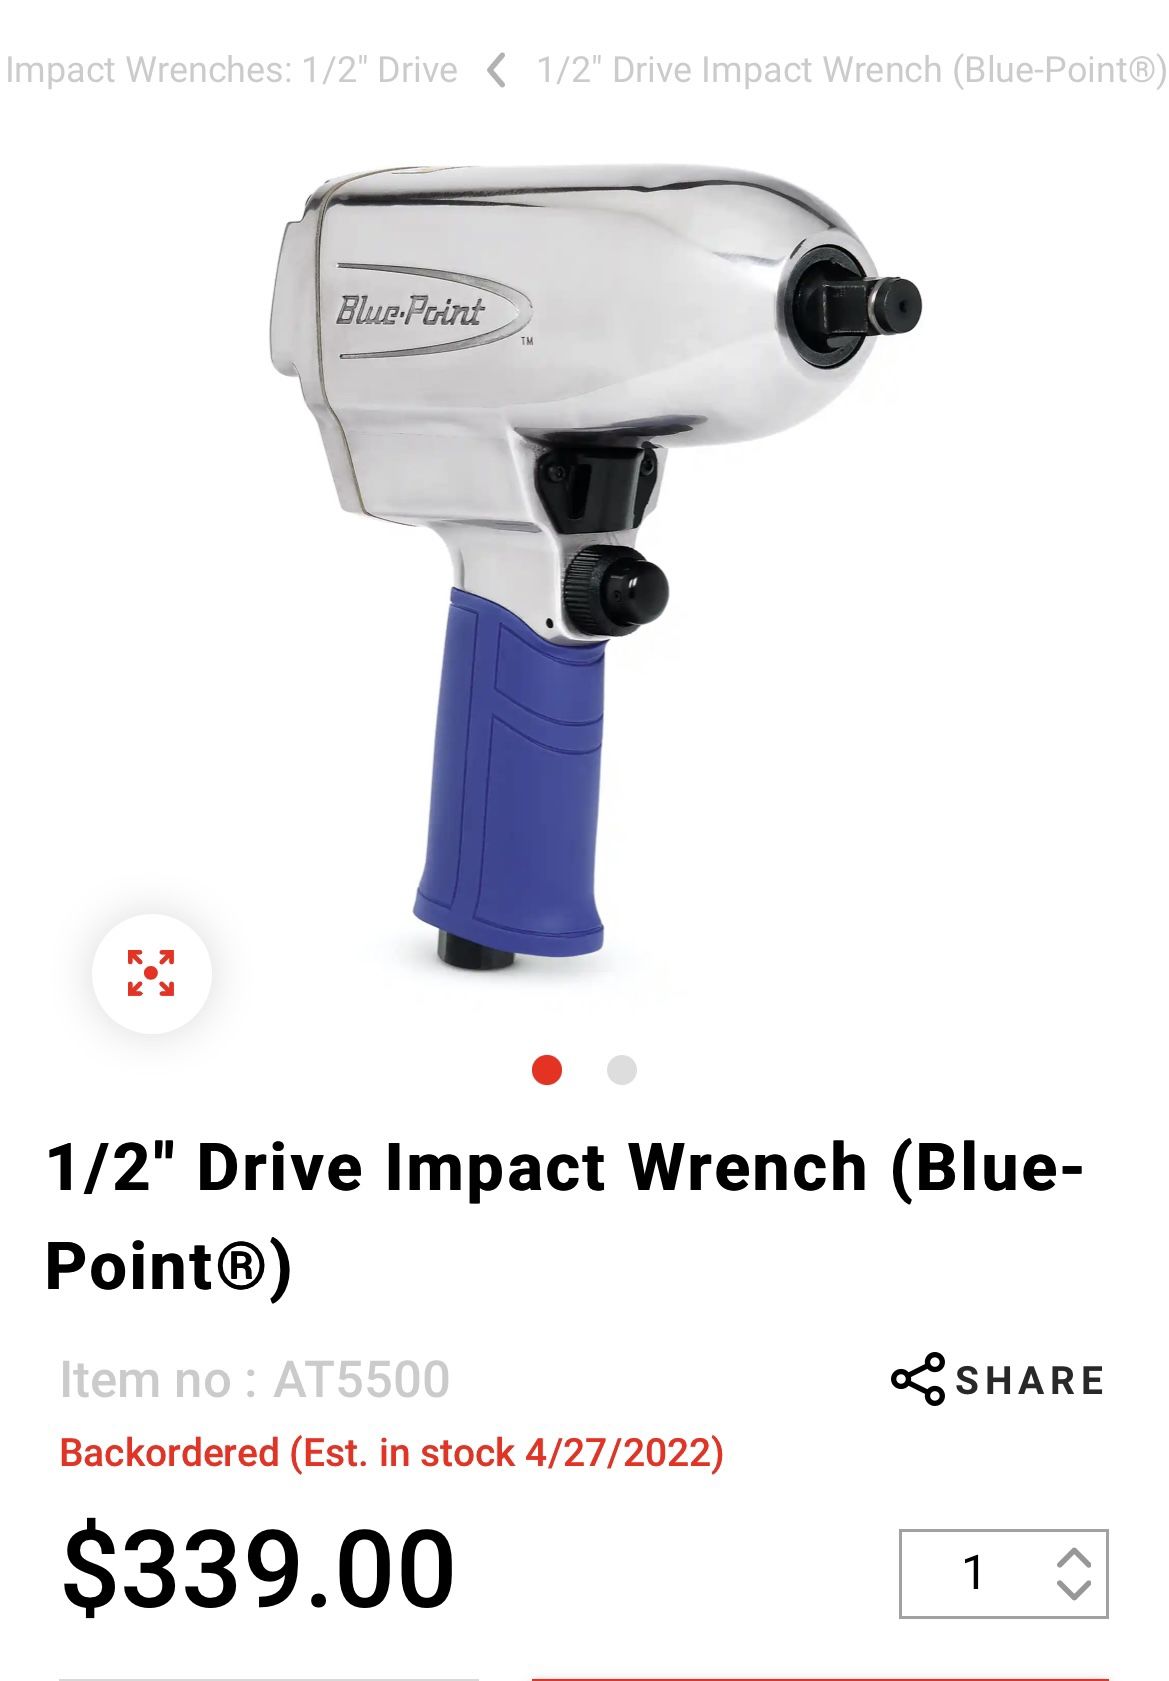 (Never Been Used) 1/2” Drive Impact Wrench Blue-Point AT5500